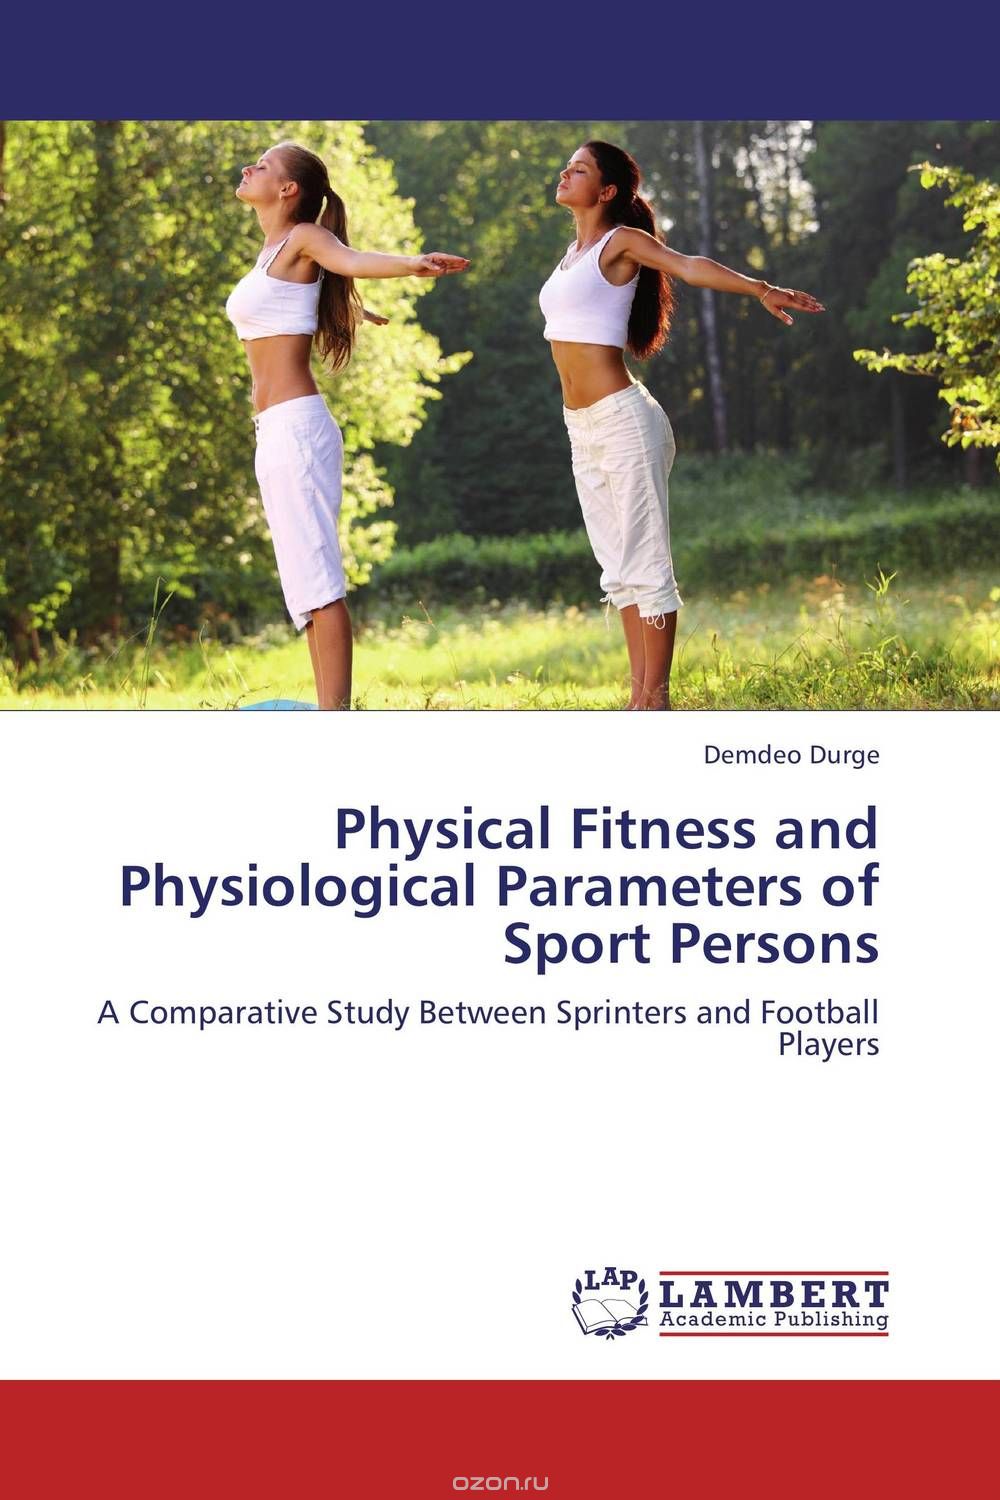 Physical Fitness and Physiological Parameters of Sport Persons